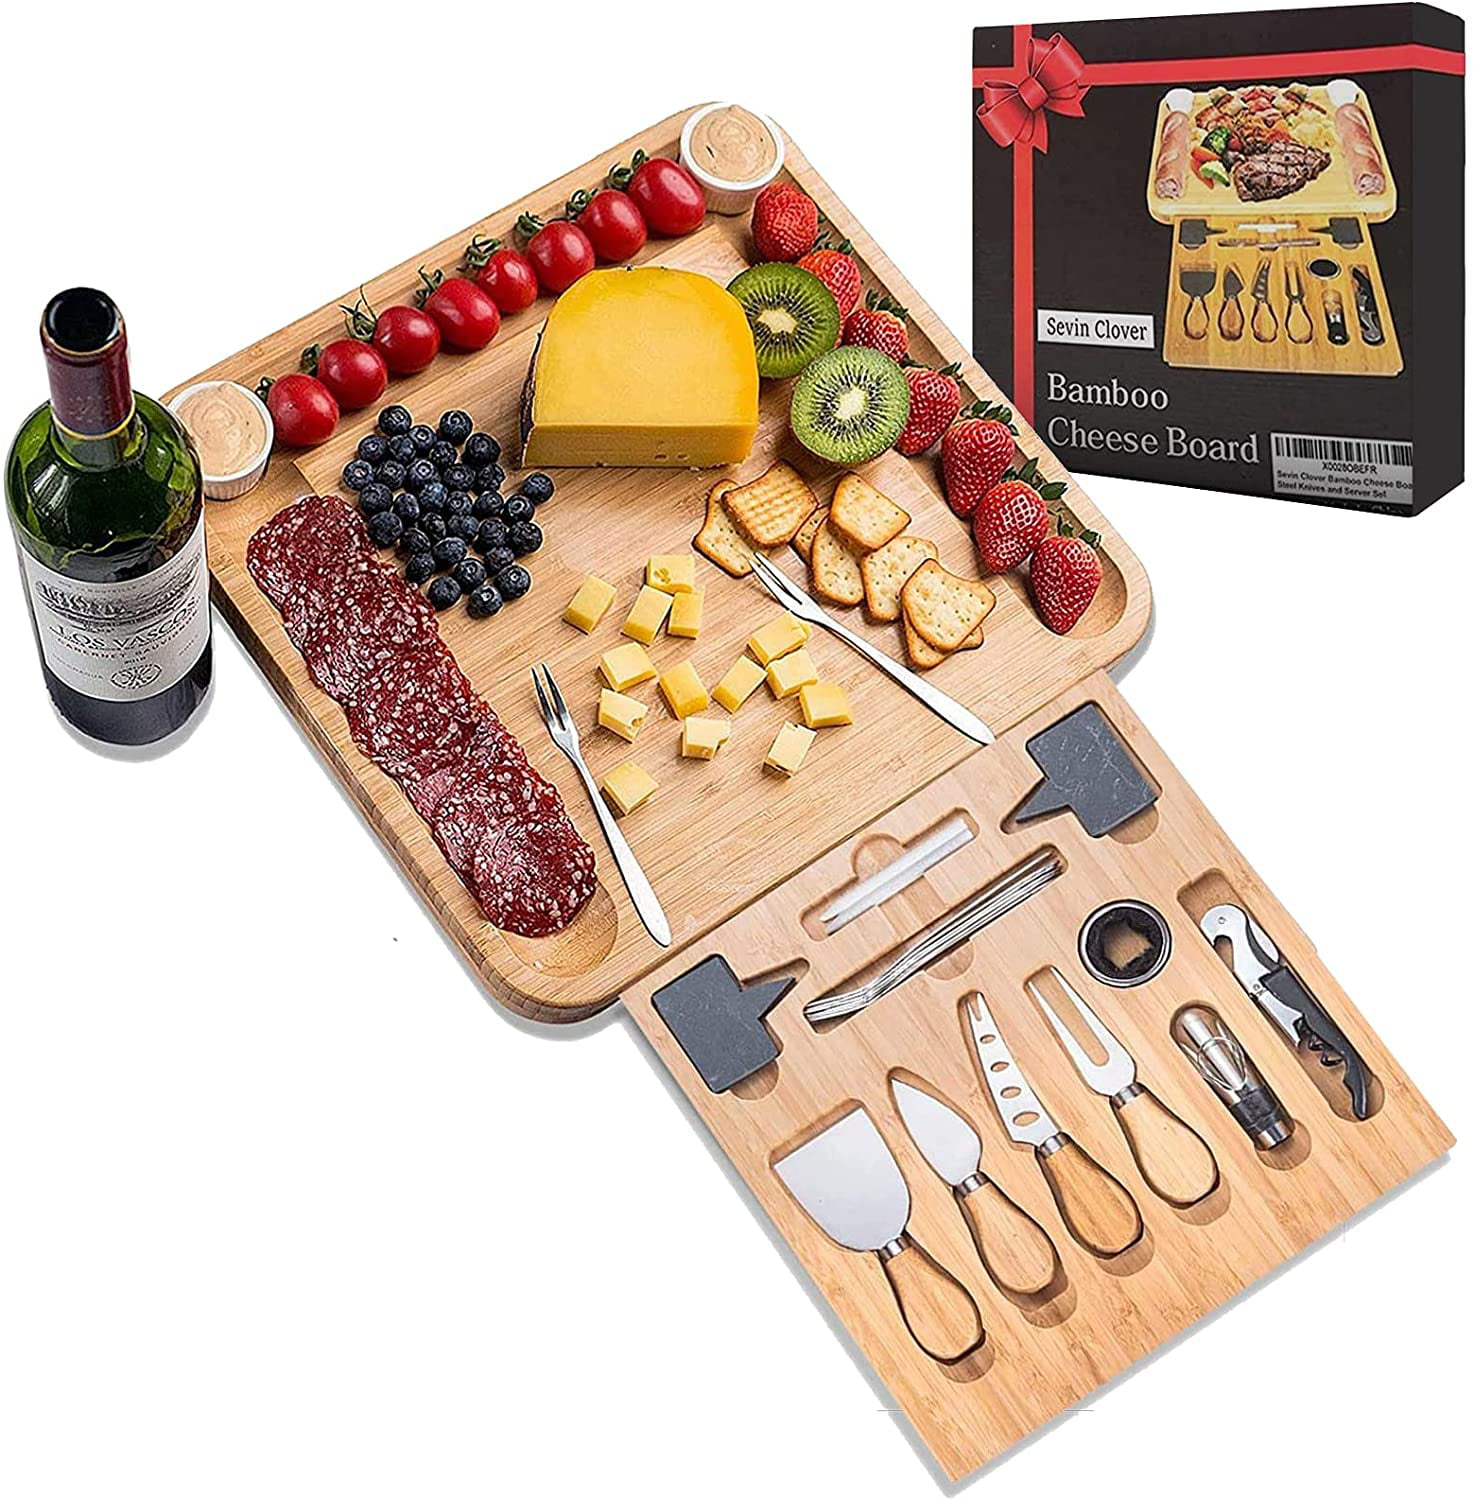 Bamboo Cheese Board Set with 4 Stainless Steel Utensils Included Serving Plate and More Charcuterie Plate Perfect House Warming Present Works as a Cheese Plate Cutting Board 